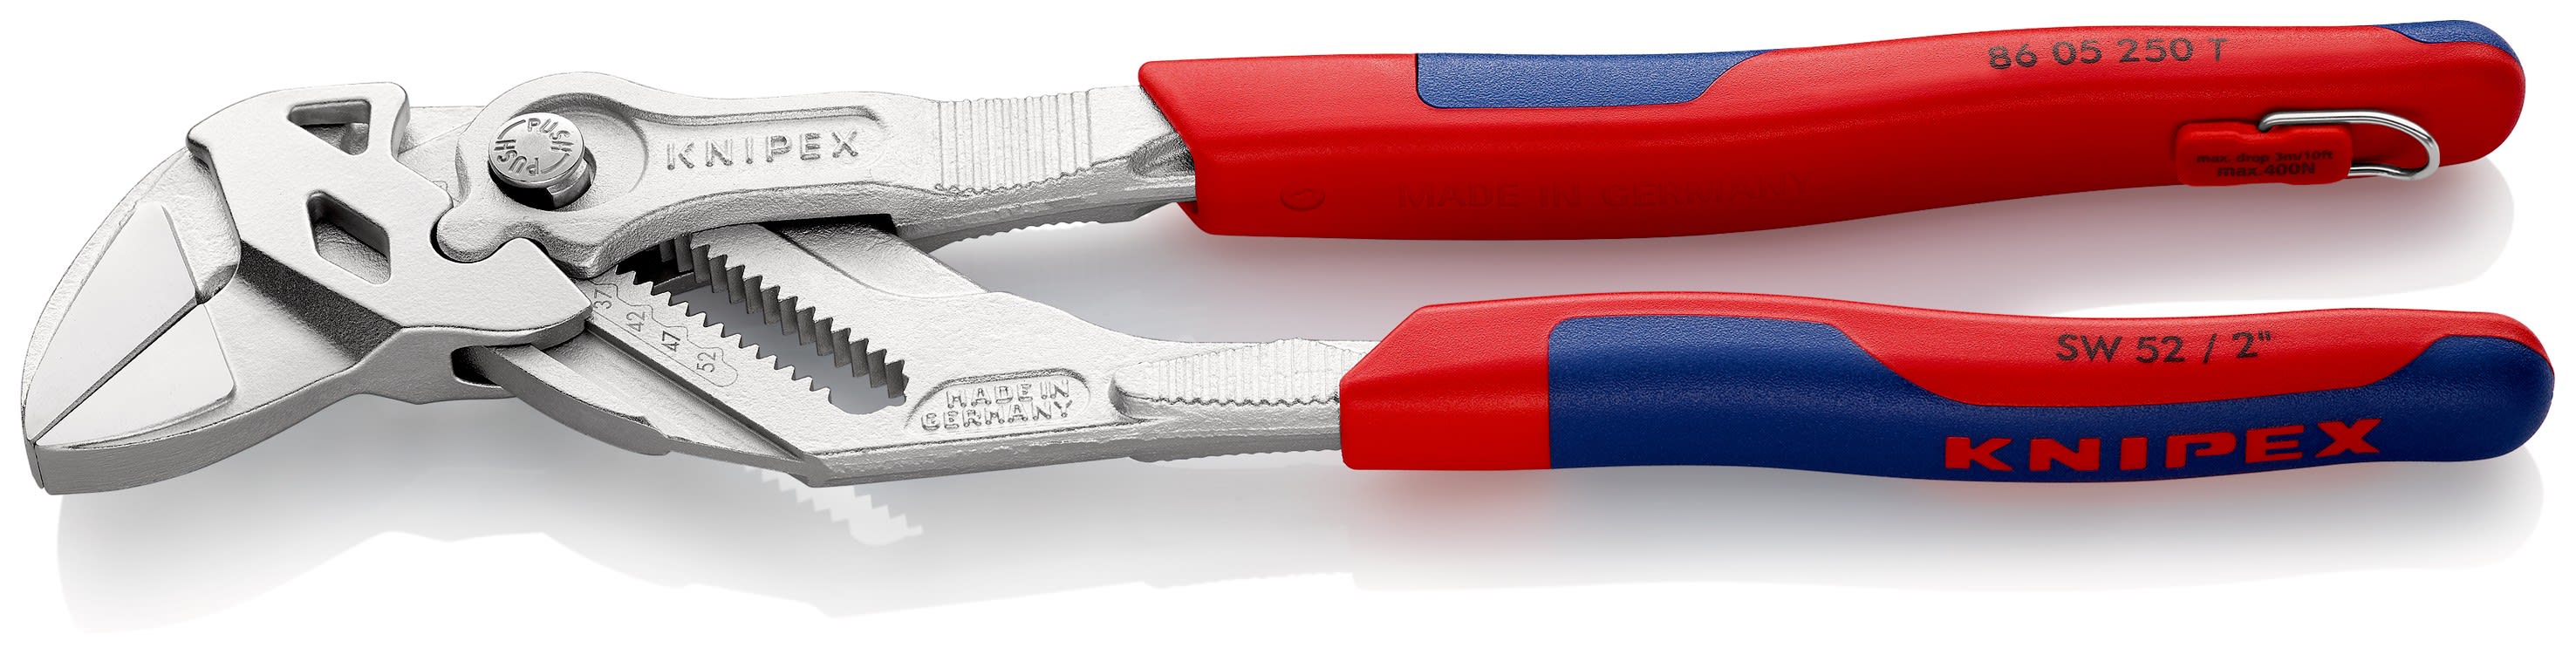 KNIPEX - Pince-cle 250mm - Bi-matiere - Chromee - Antichute - Ouverture 52mm ou 2 - SC